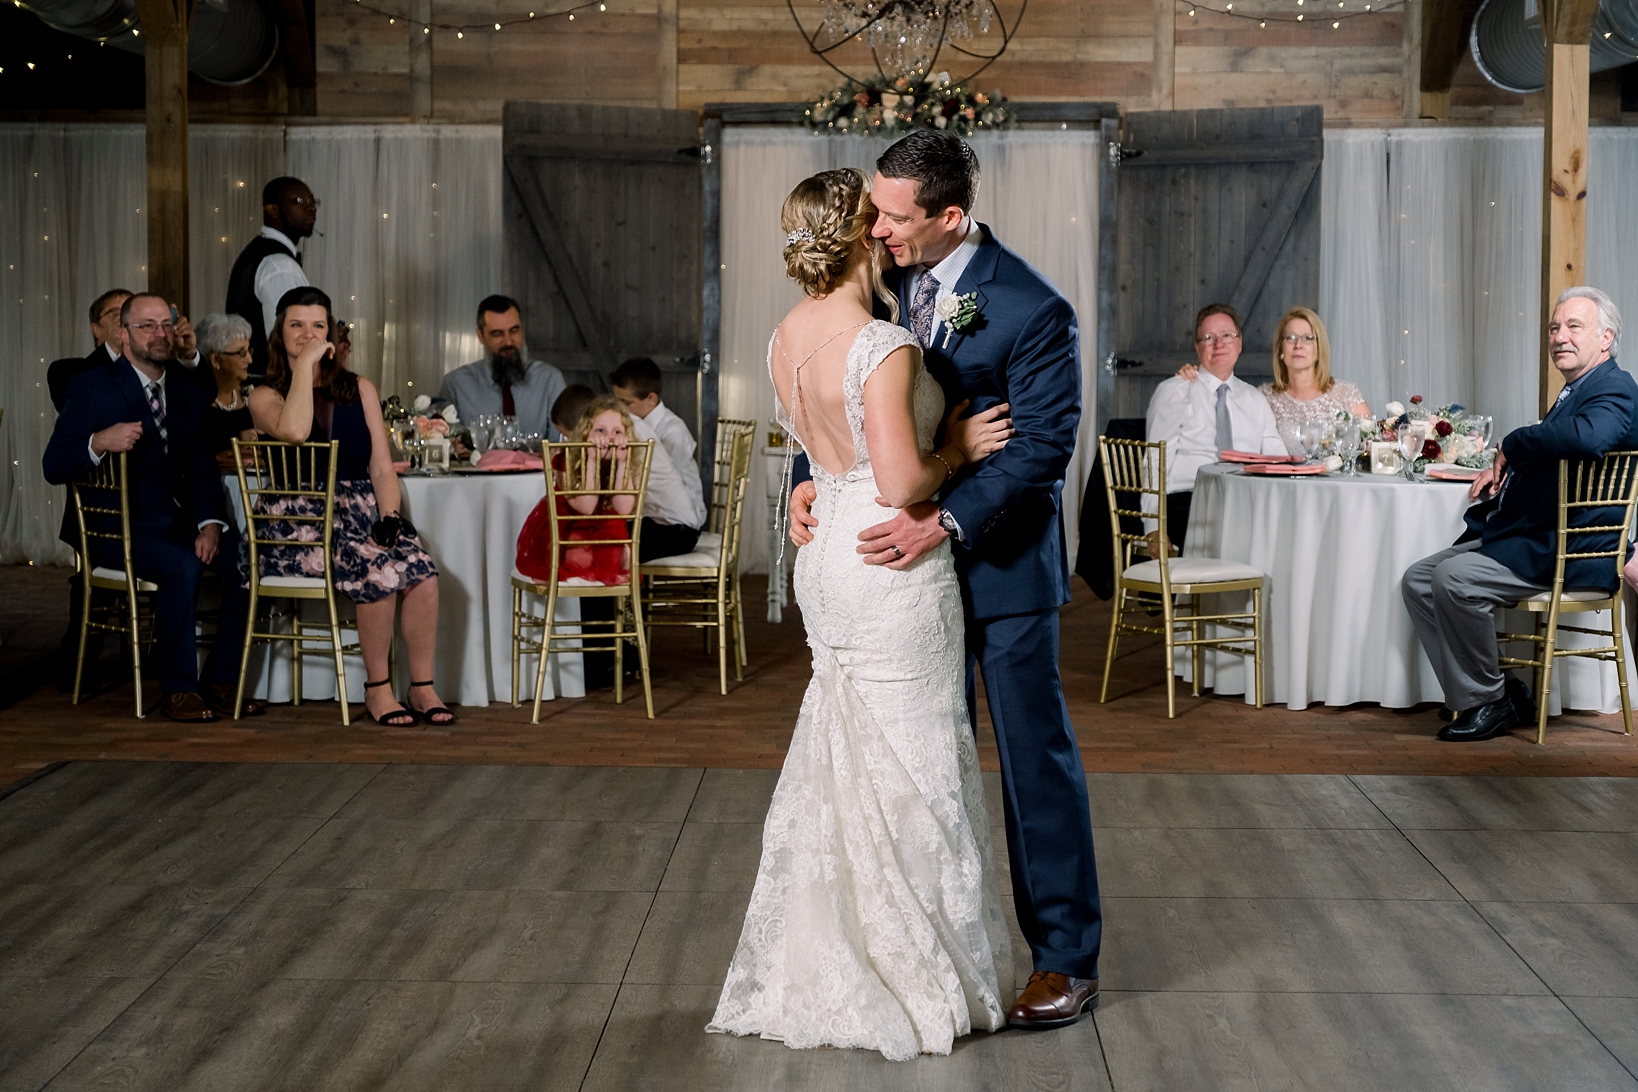 Bride and Groom dance their first dance inside the barn at Cross Creek Ranch in Seffner, FL